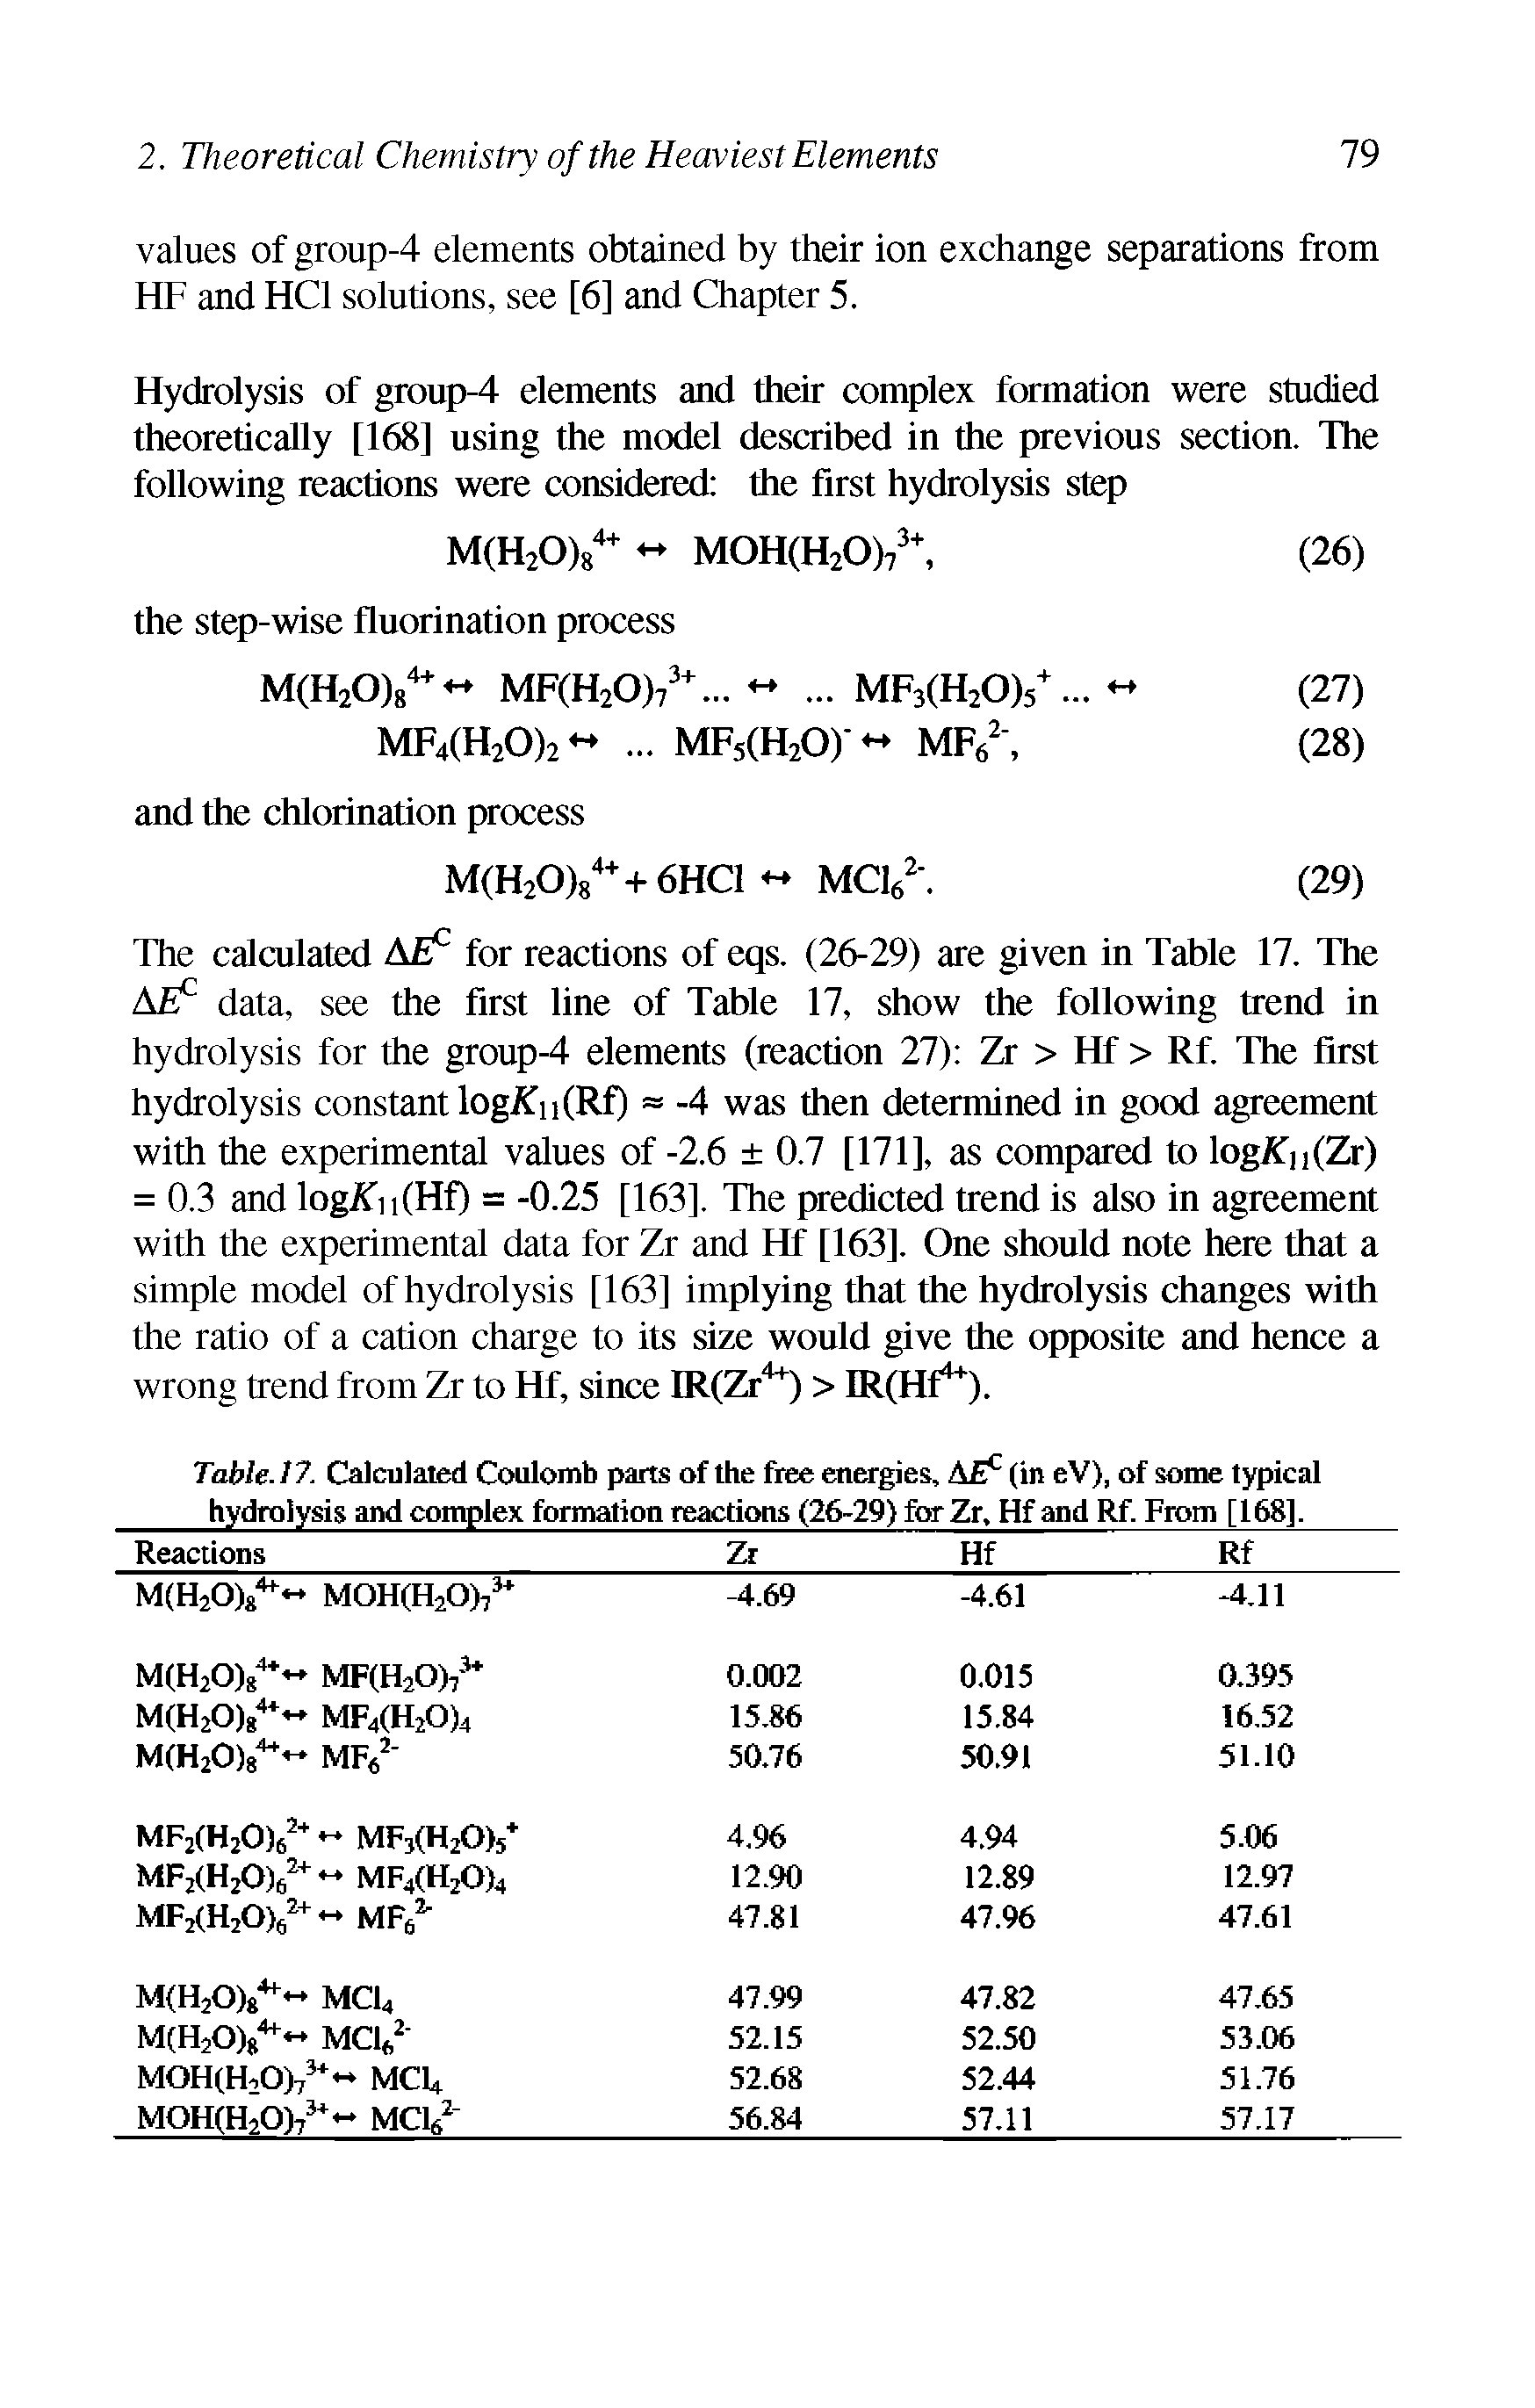 Table. 17. Calculated Coulomb parts of the free energies, ATT (in eV), of some typical hydrolysis and complex formation reactions (26-29) for Zr. Hf and Rf. From [168].